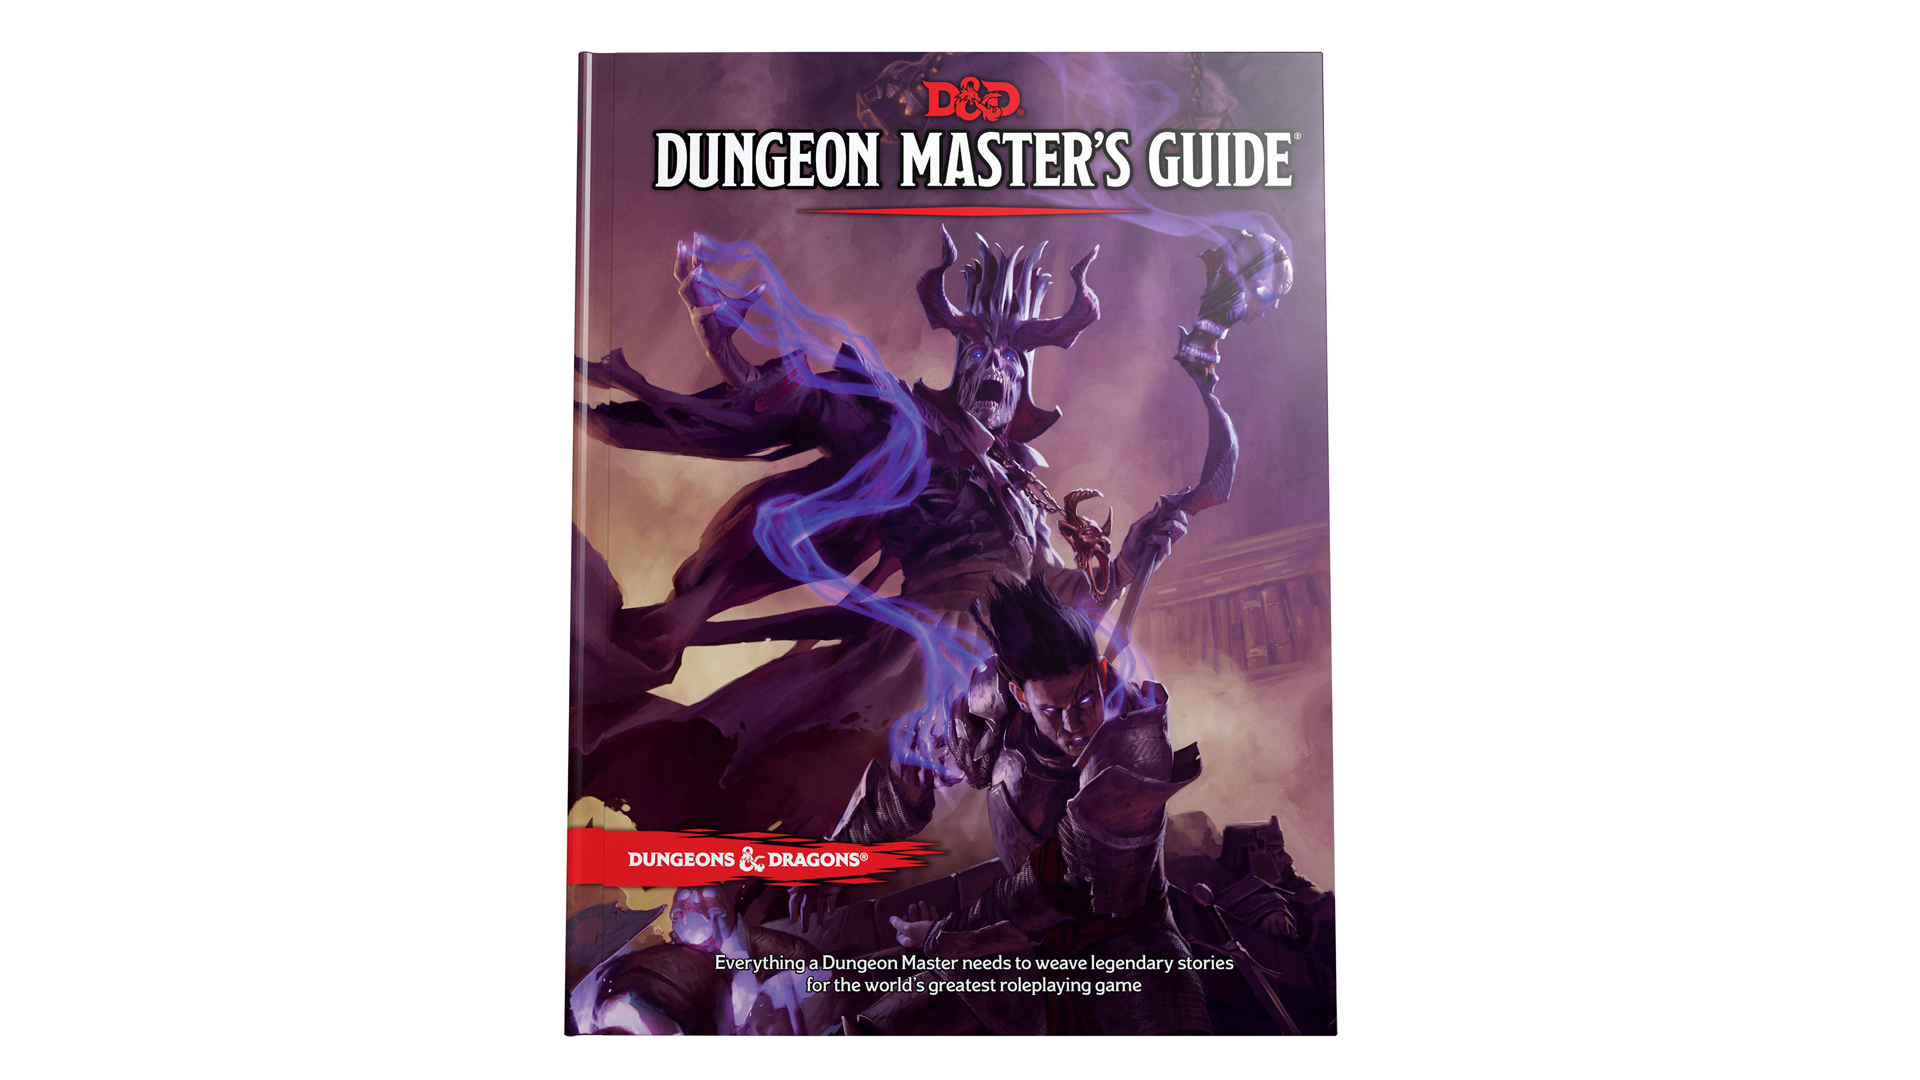 Dungeons & Dragons 5E book Dungeon Master's Guide